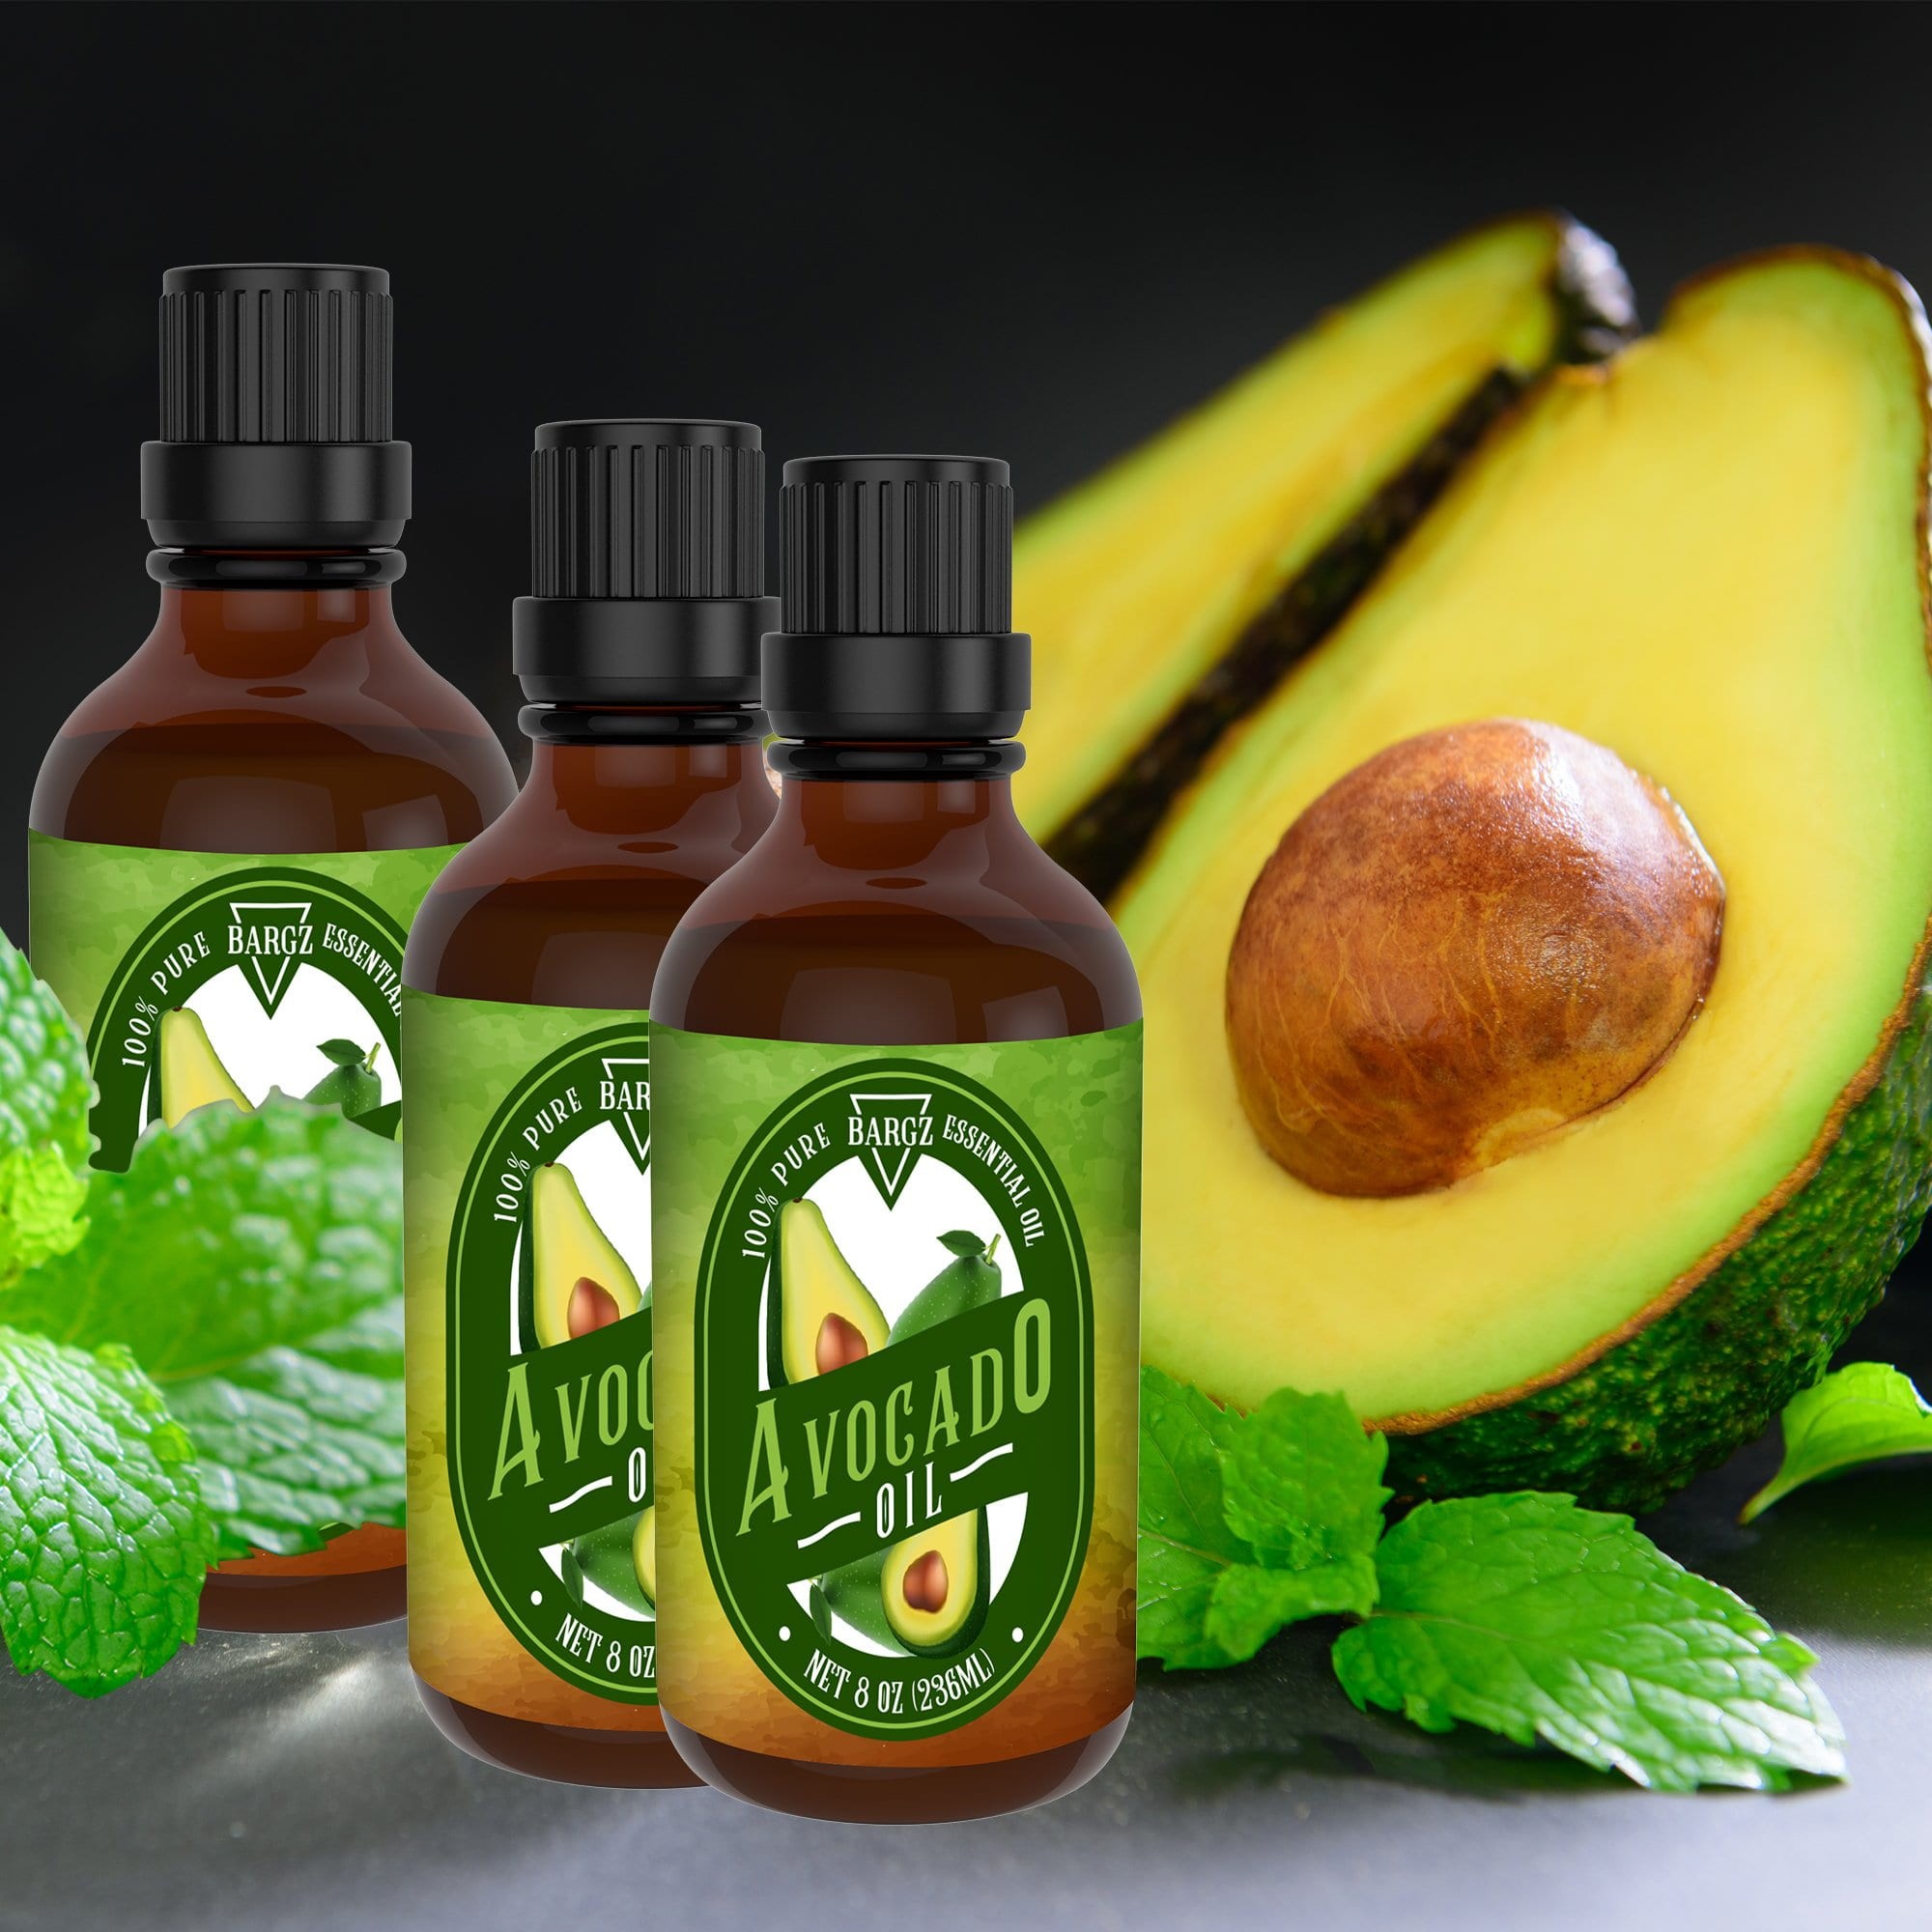 Benefits of Using Avocado Carrier Oil